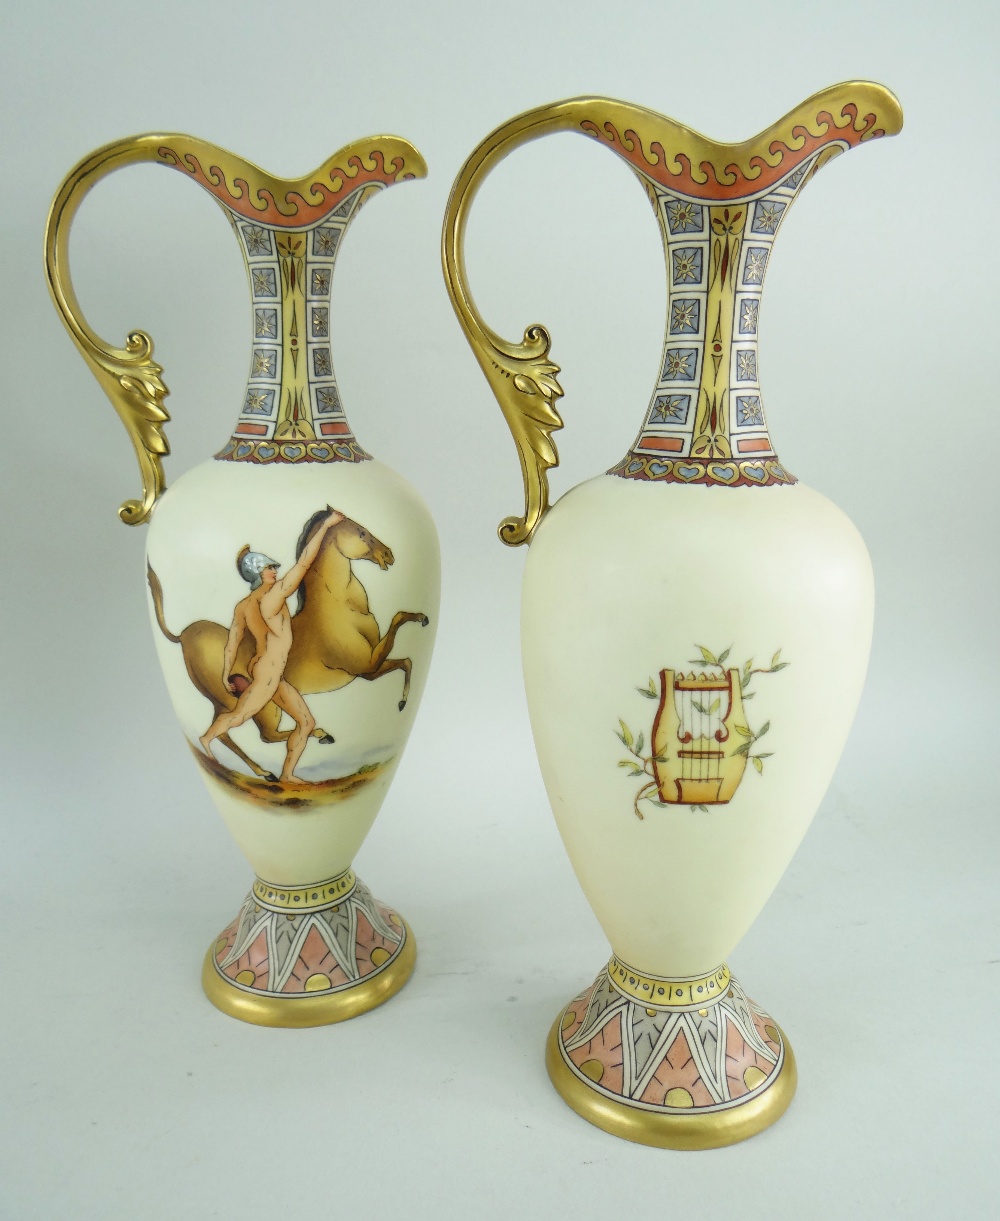 PAIR RUDOLSTADT (LAZARUS STRAUSS & SONS) PORCELAIN EWERS, CIRCA 1910, of neo-classical style, - Image 2 of 4